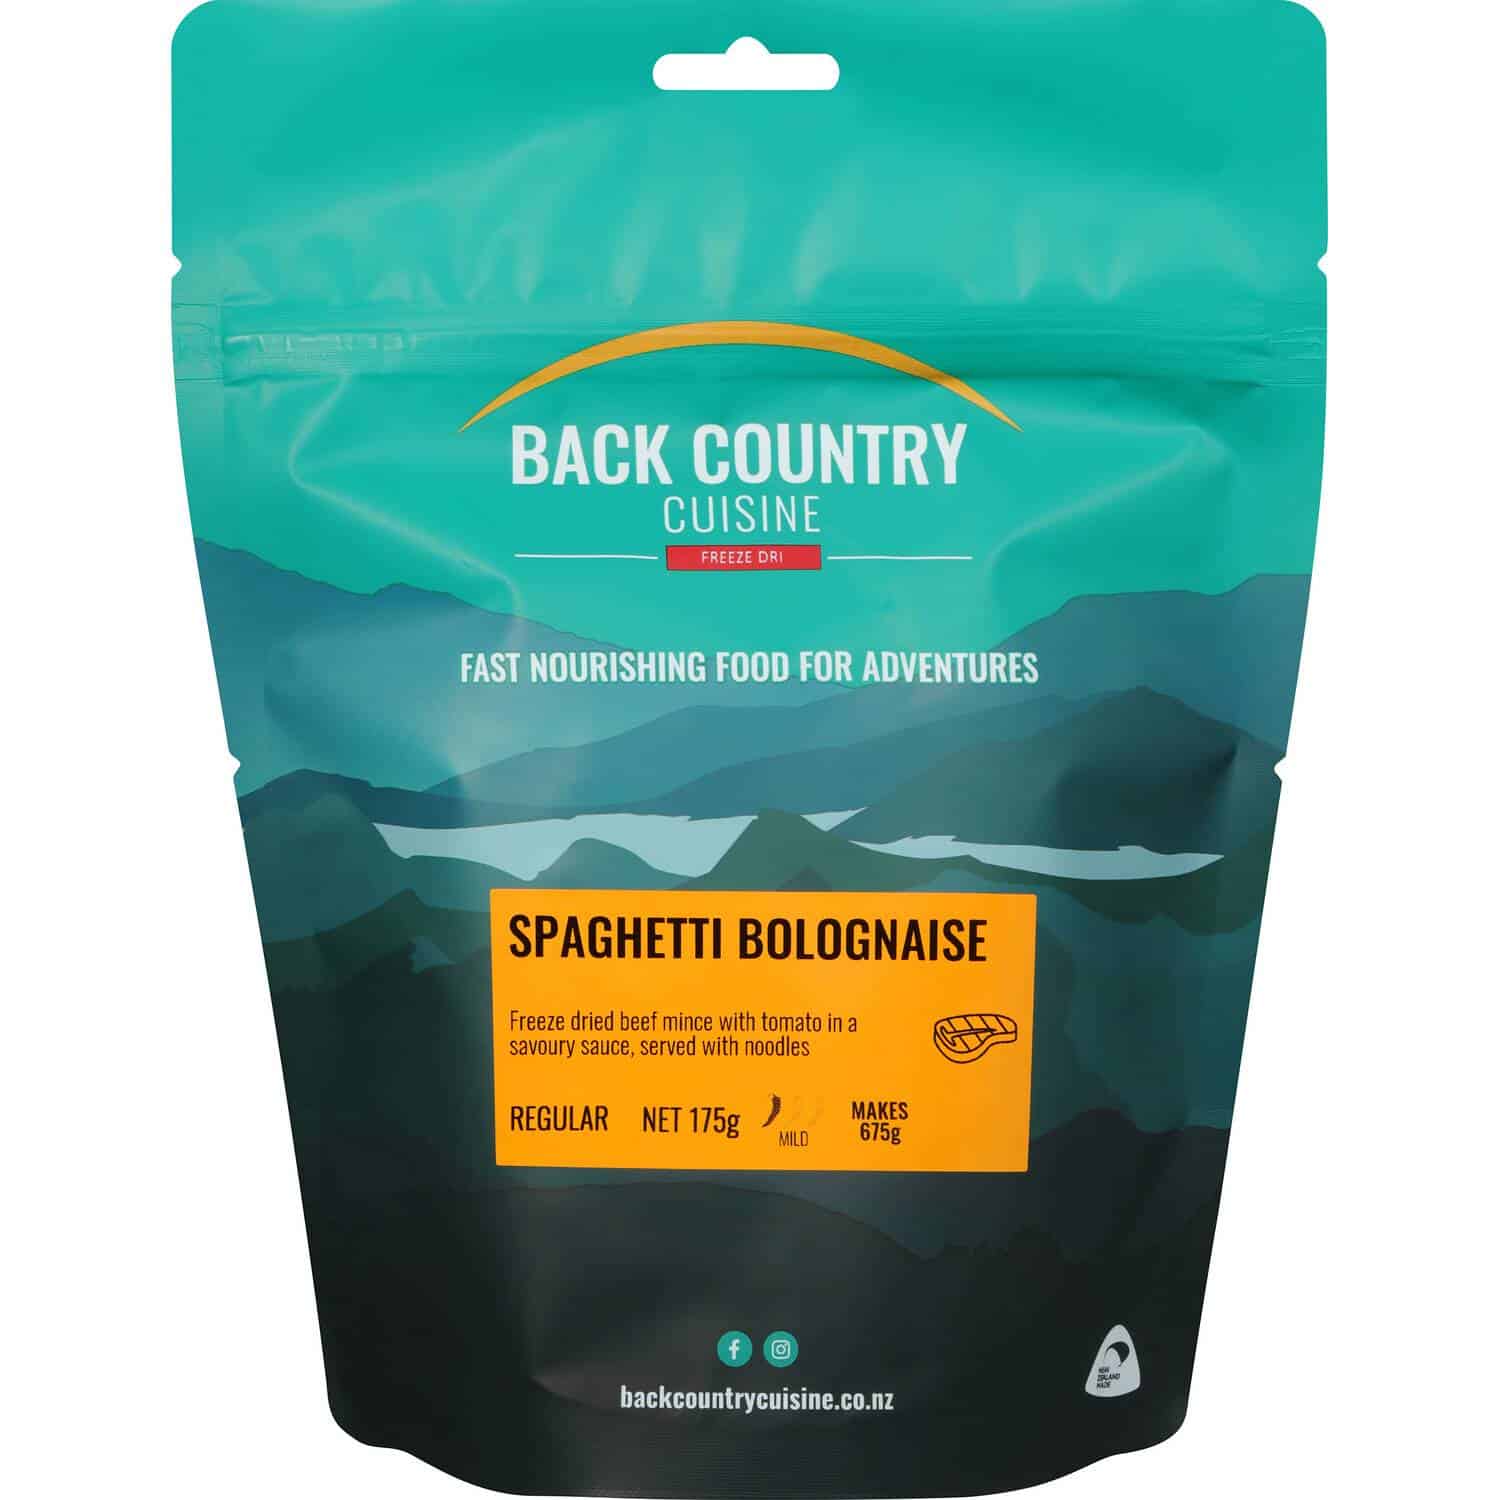 Back Country Cuisine Spaghetti Bolognaise Regular - Tramping Food and Accessories sold by Venture Outdoors NZ